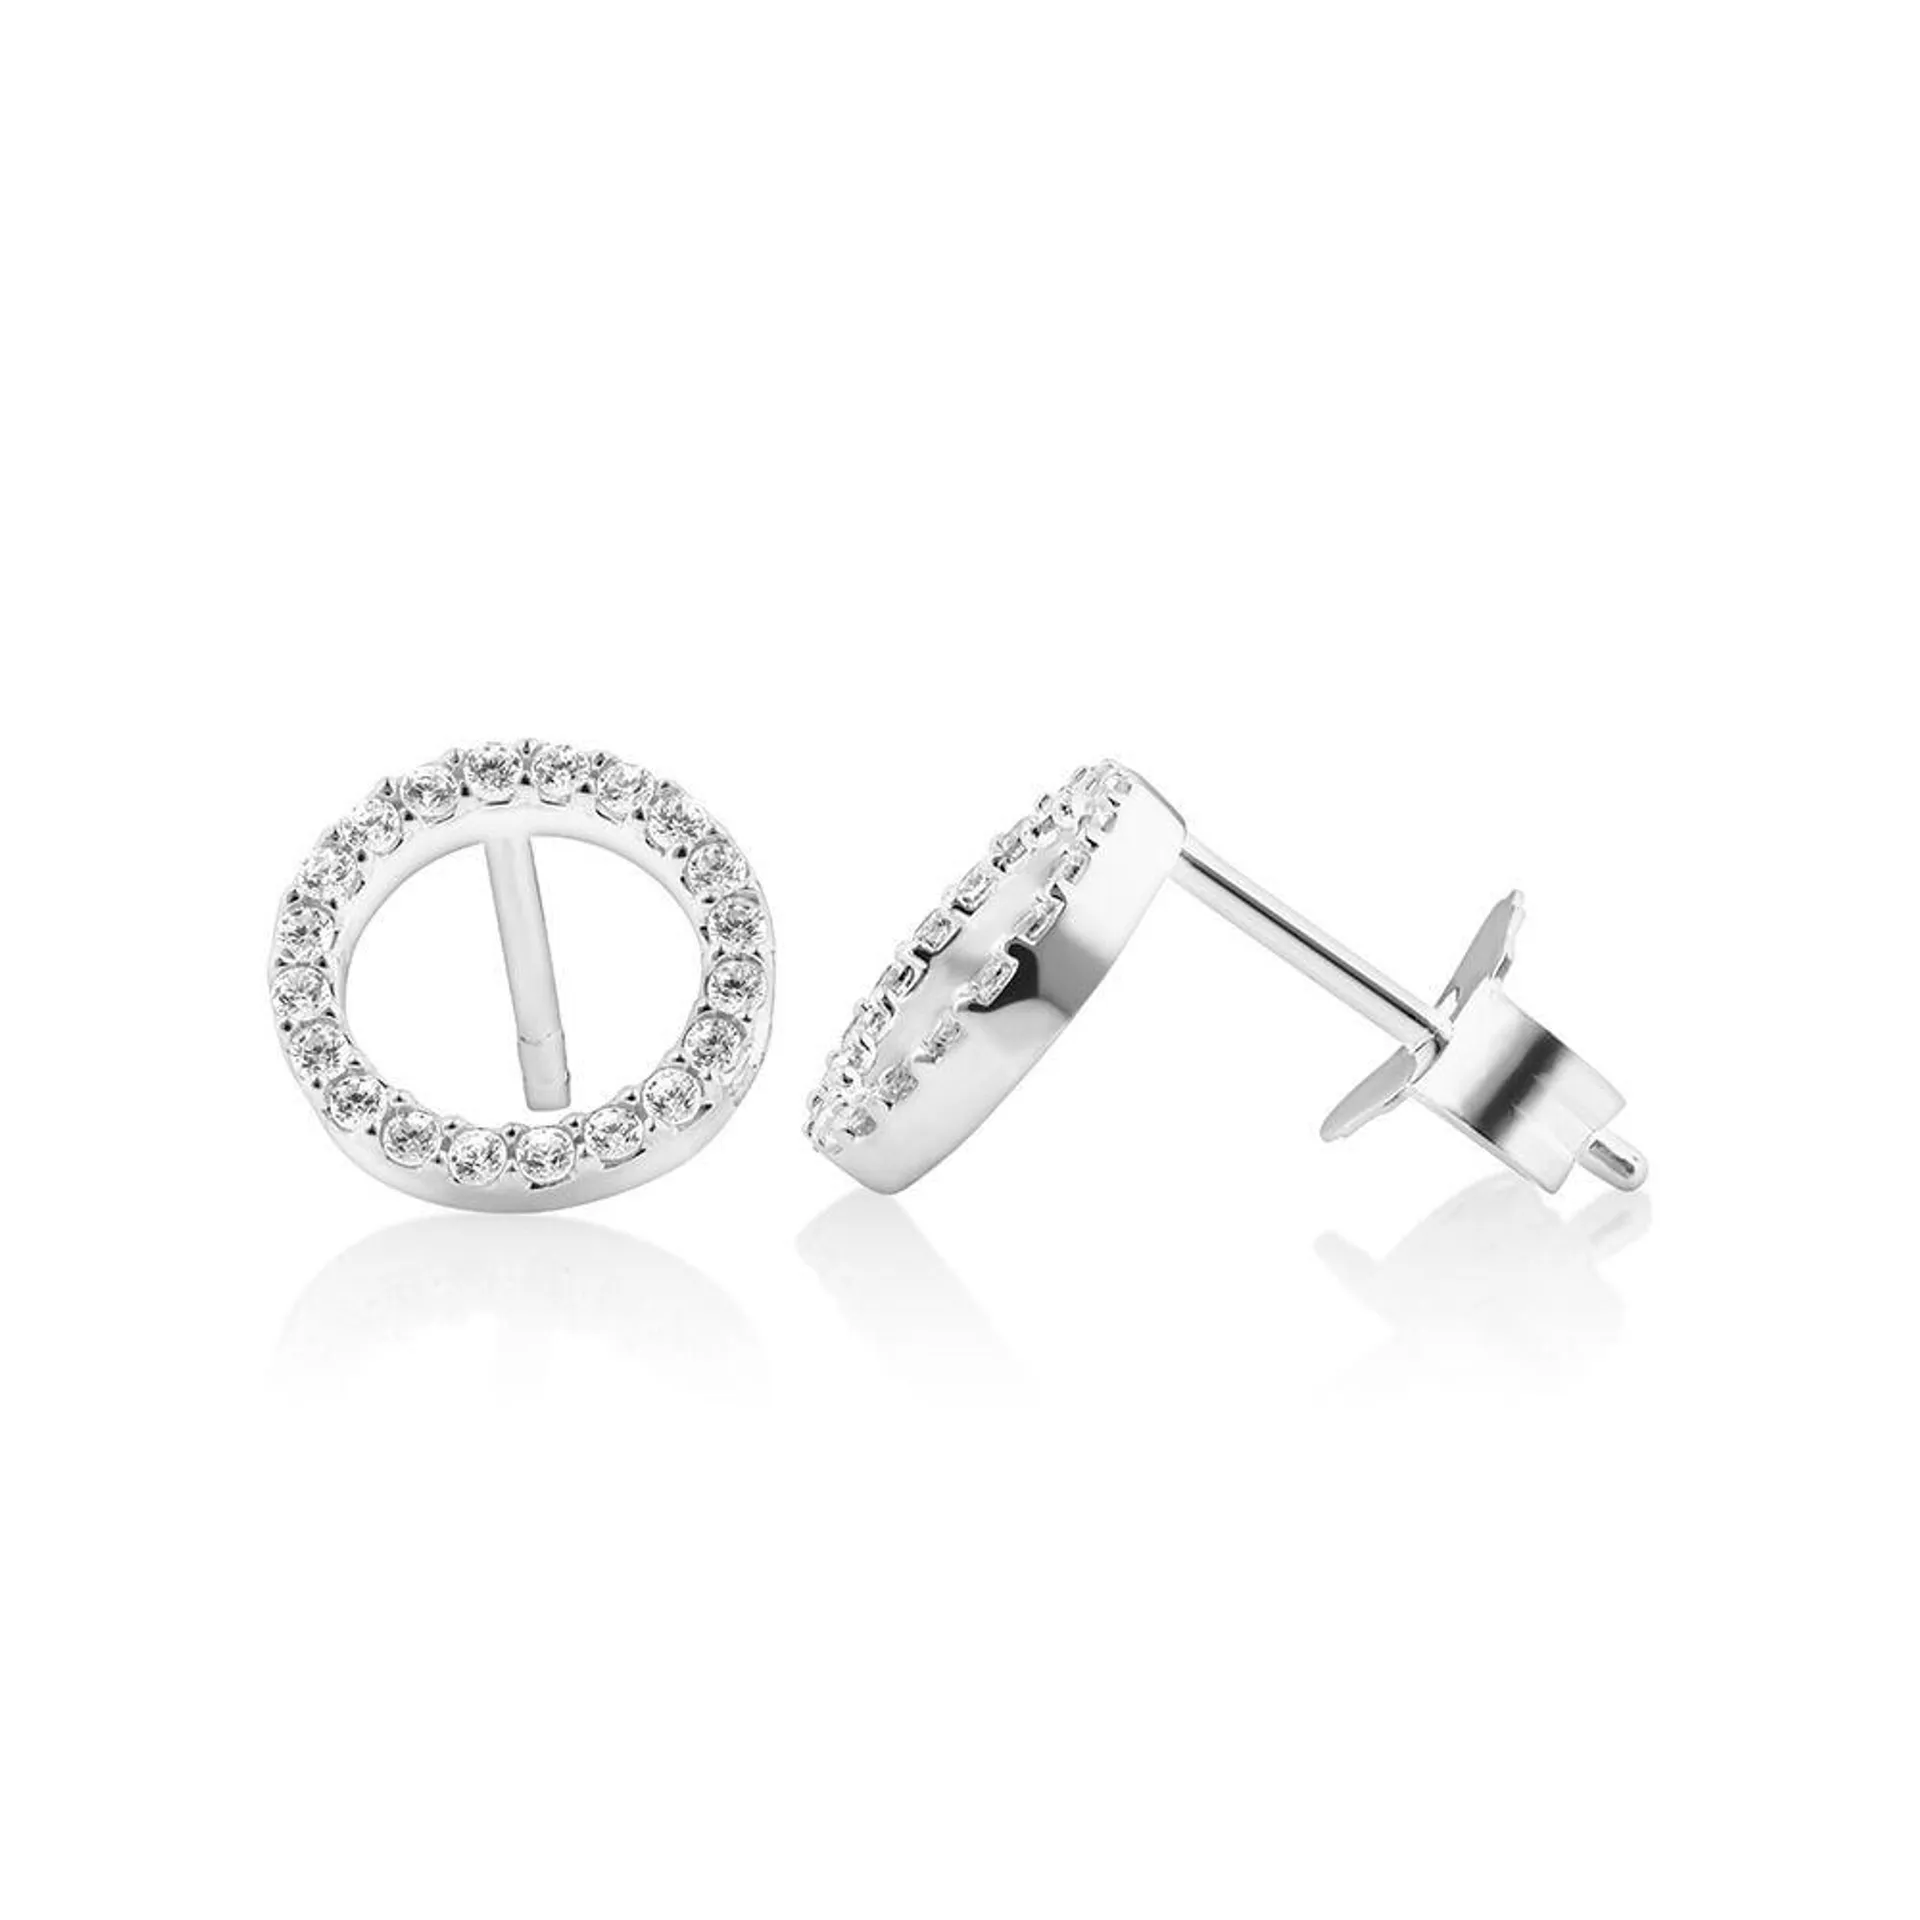 Circle Stud Earrings with Cubic Zirconia in Sterling Silver